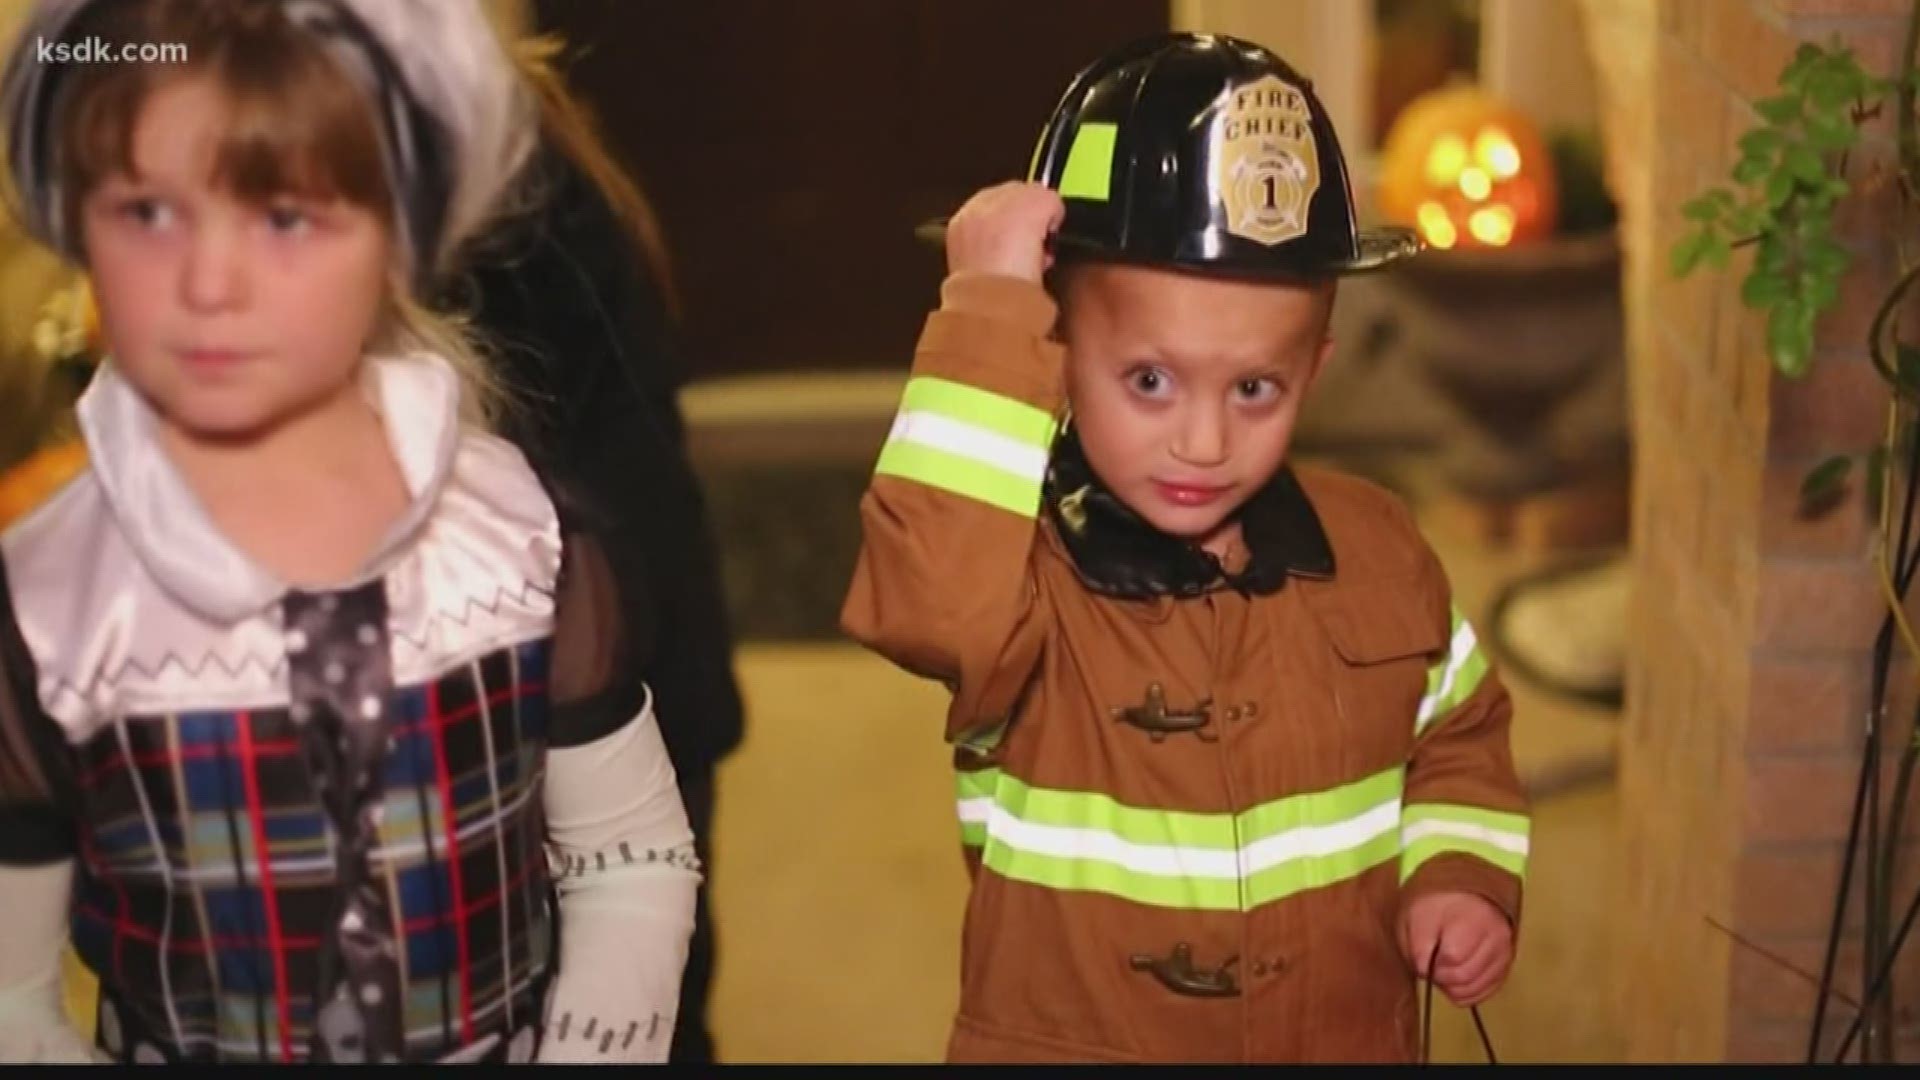 Halloween can be stressful for children with disabilities. Kris Krieger with the Easterseals Midwest has some tips on how to make things a little easier.